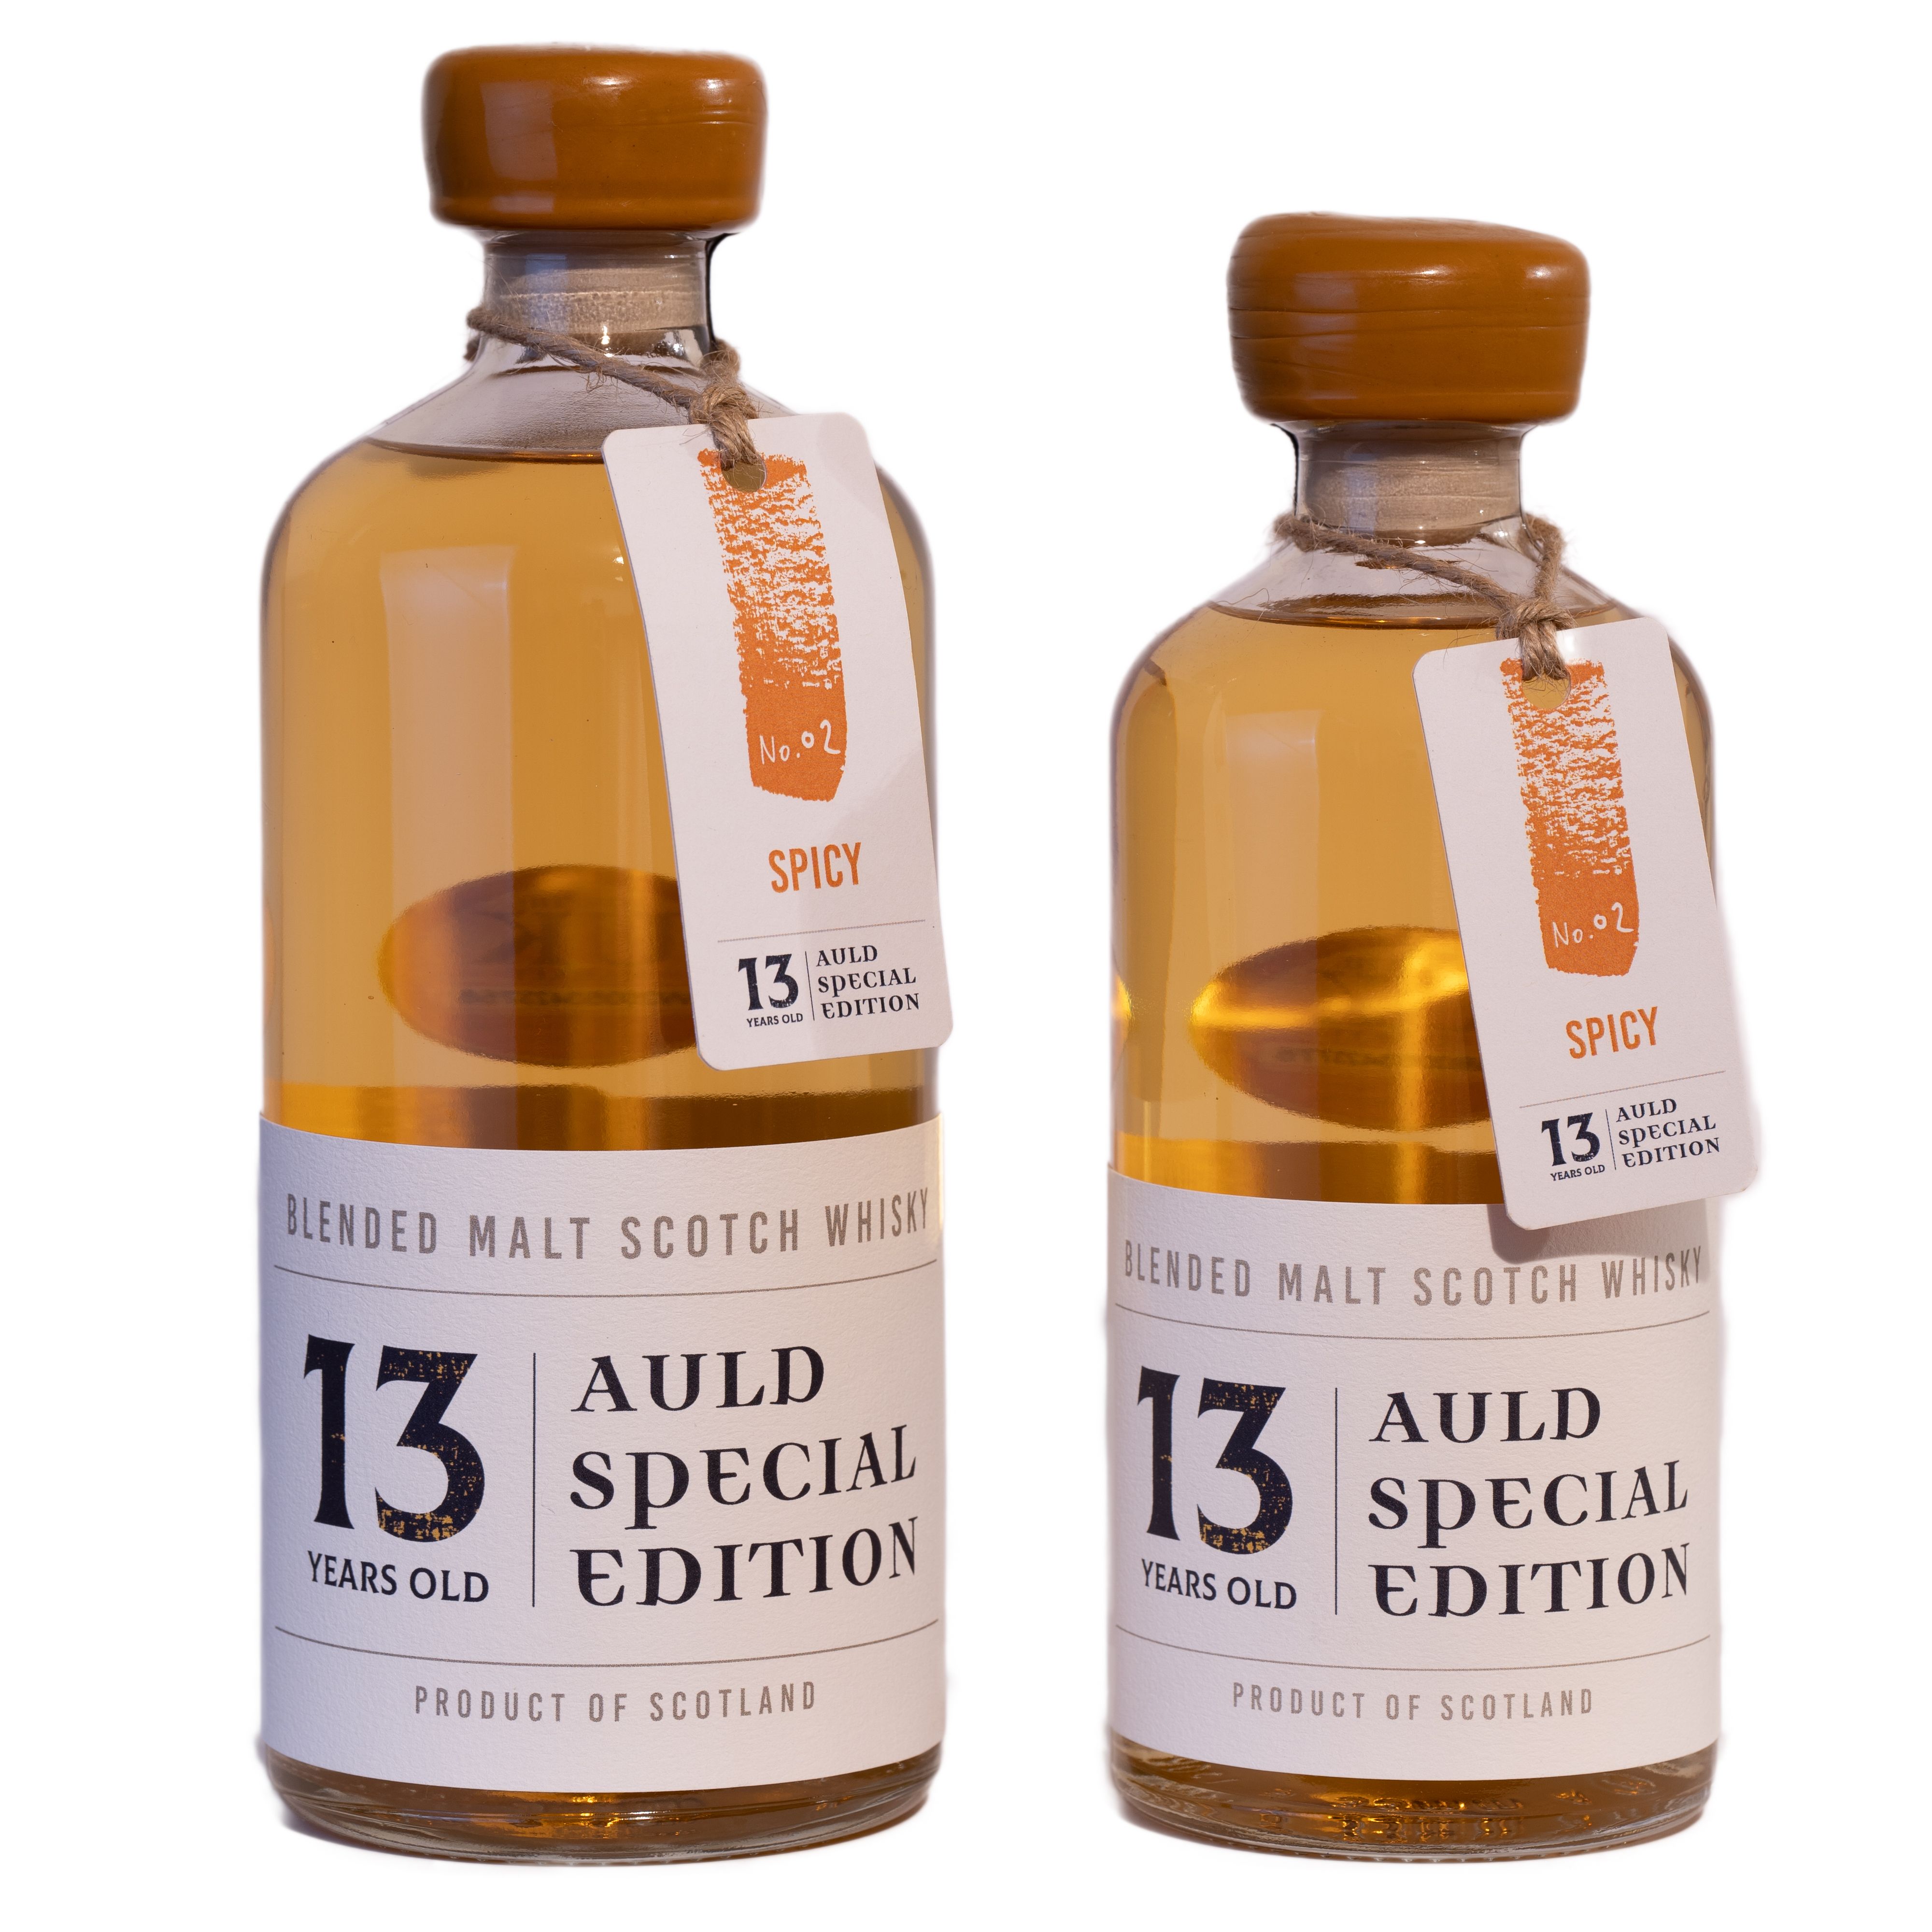 Auld Special Edition Spicy 13 Year Old Blended Malt Scotch